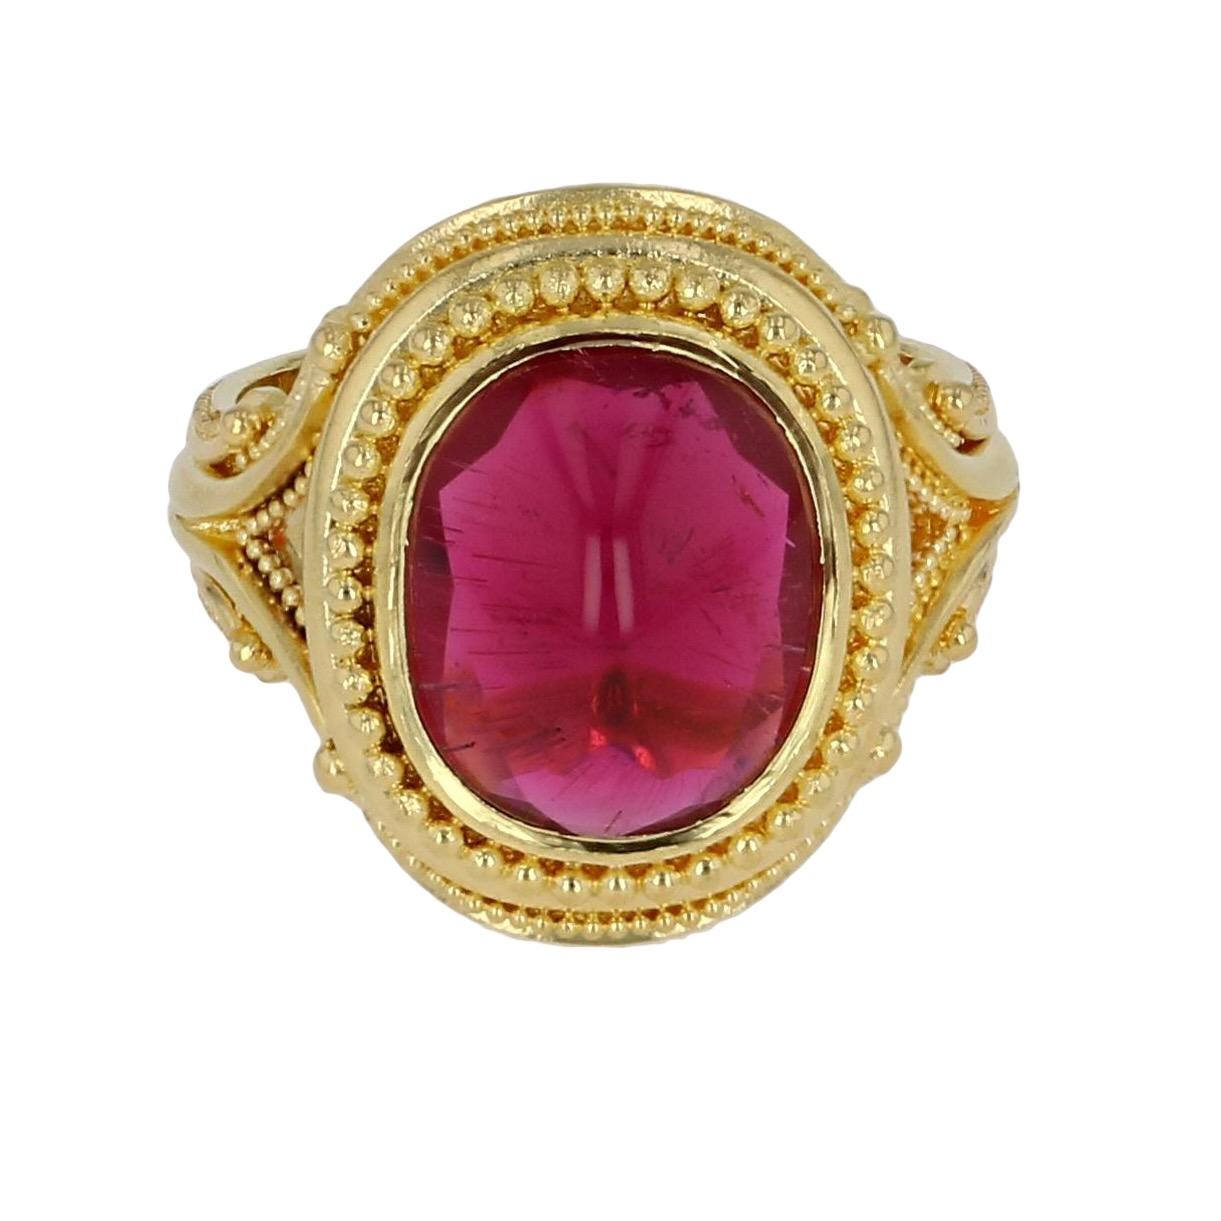 From the Kent Raible one of a kind Masterworks Collection  we bring you his buff top Rubellite Tourmaline Ring. This rich red cabochon is faceted underneath and cut to a high ridge on top, accentuating the lively inclusions in this natural stone.